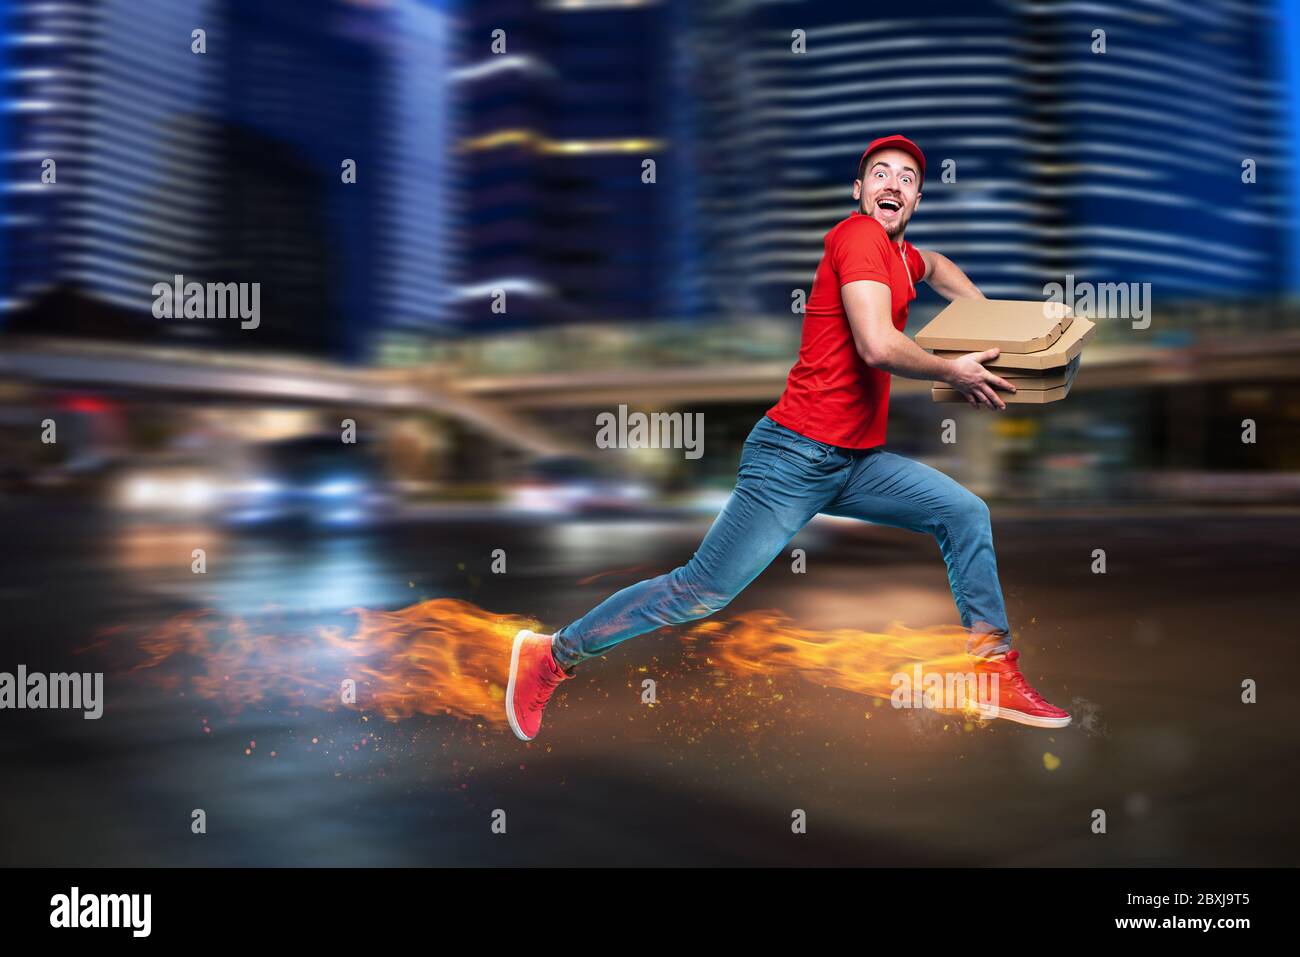 Courier runs fast to deliver quickly pizzas with fiery feet. Cyan background Stock Photo